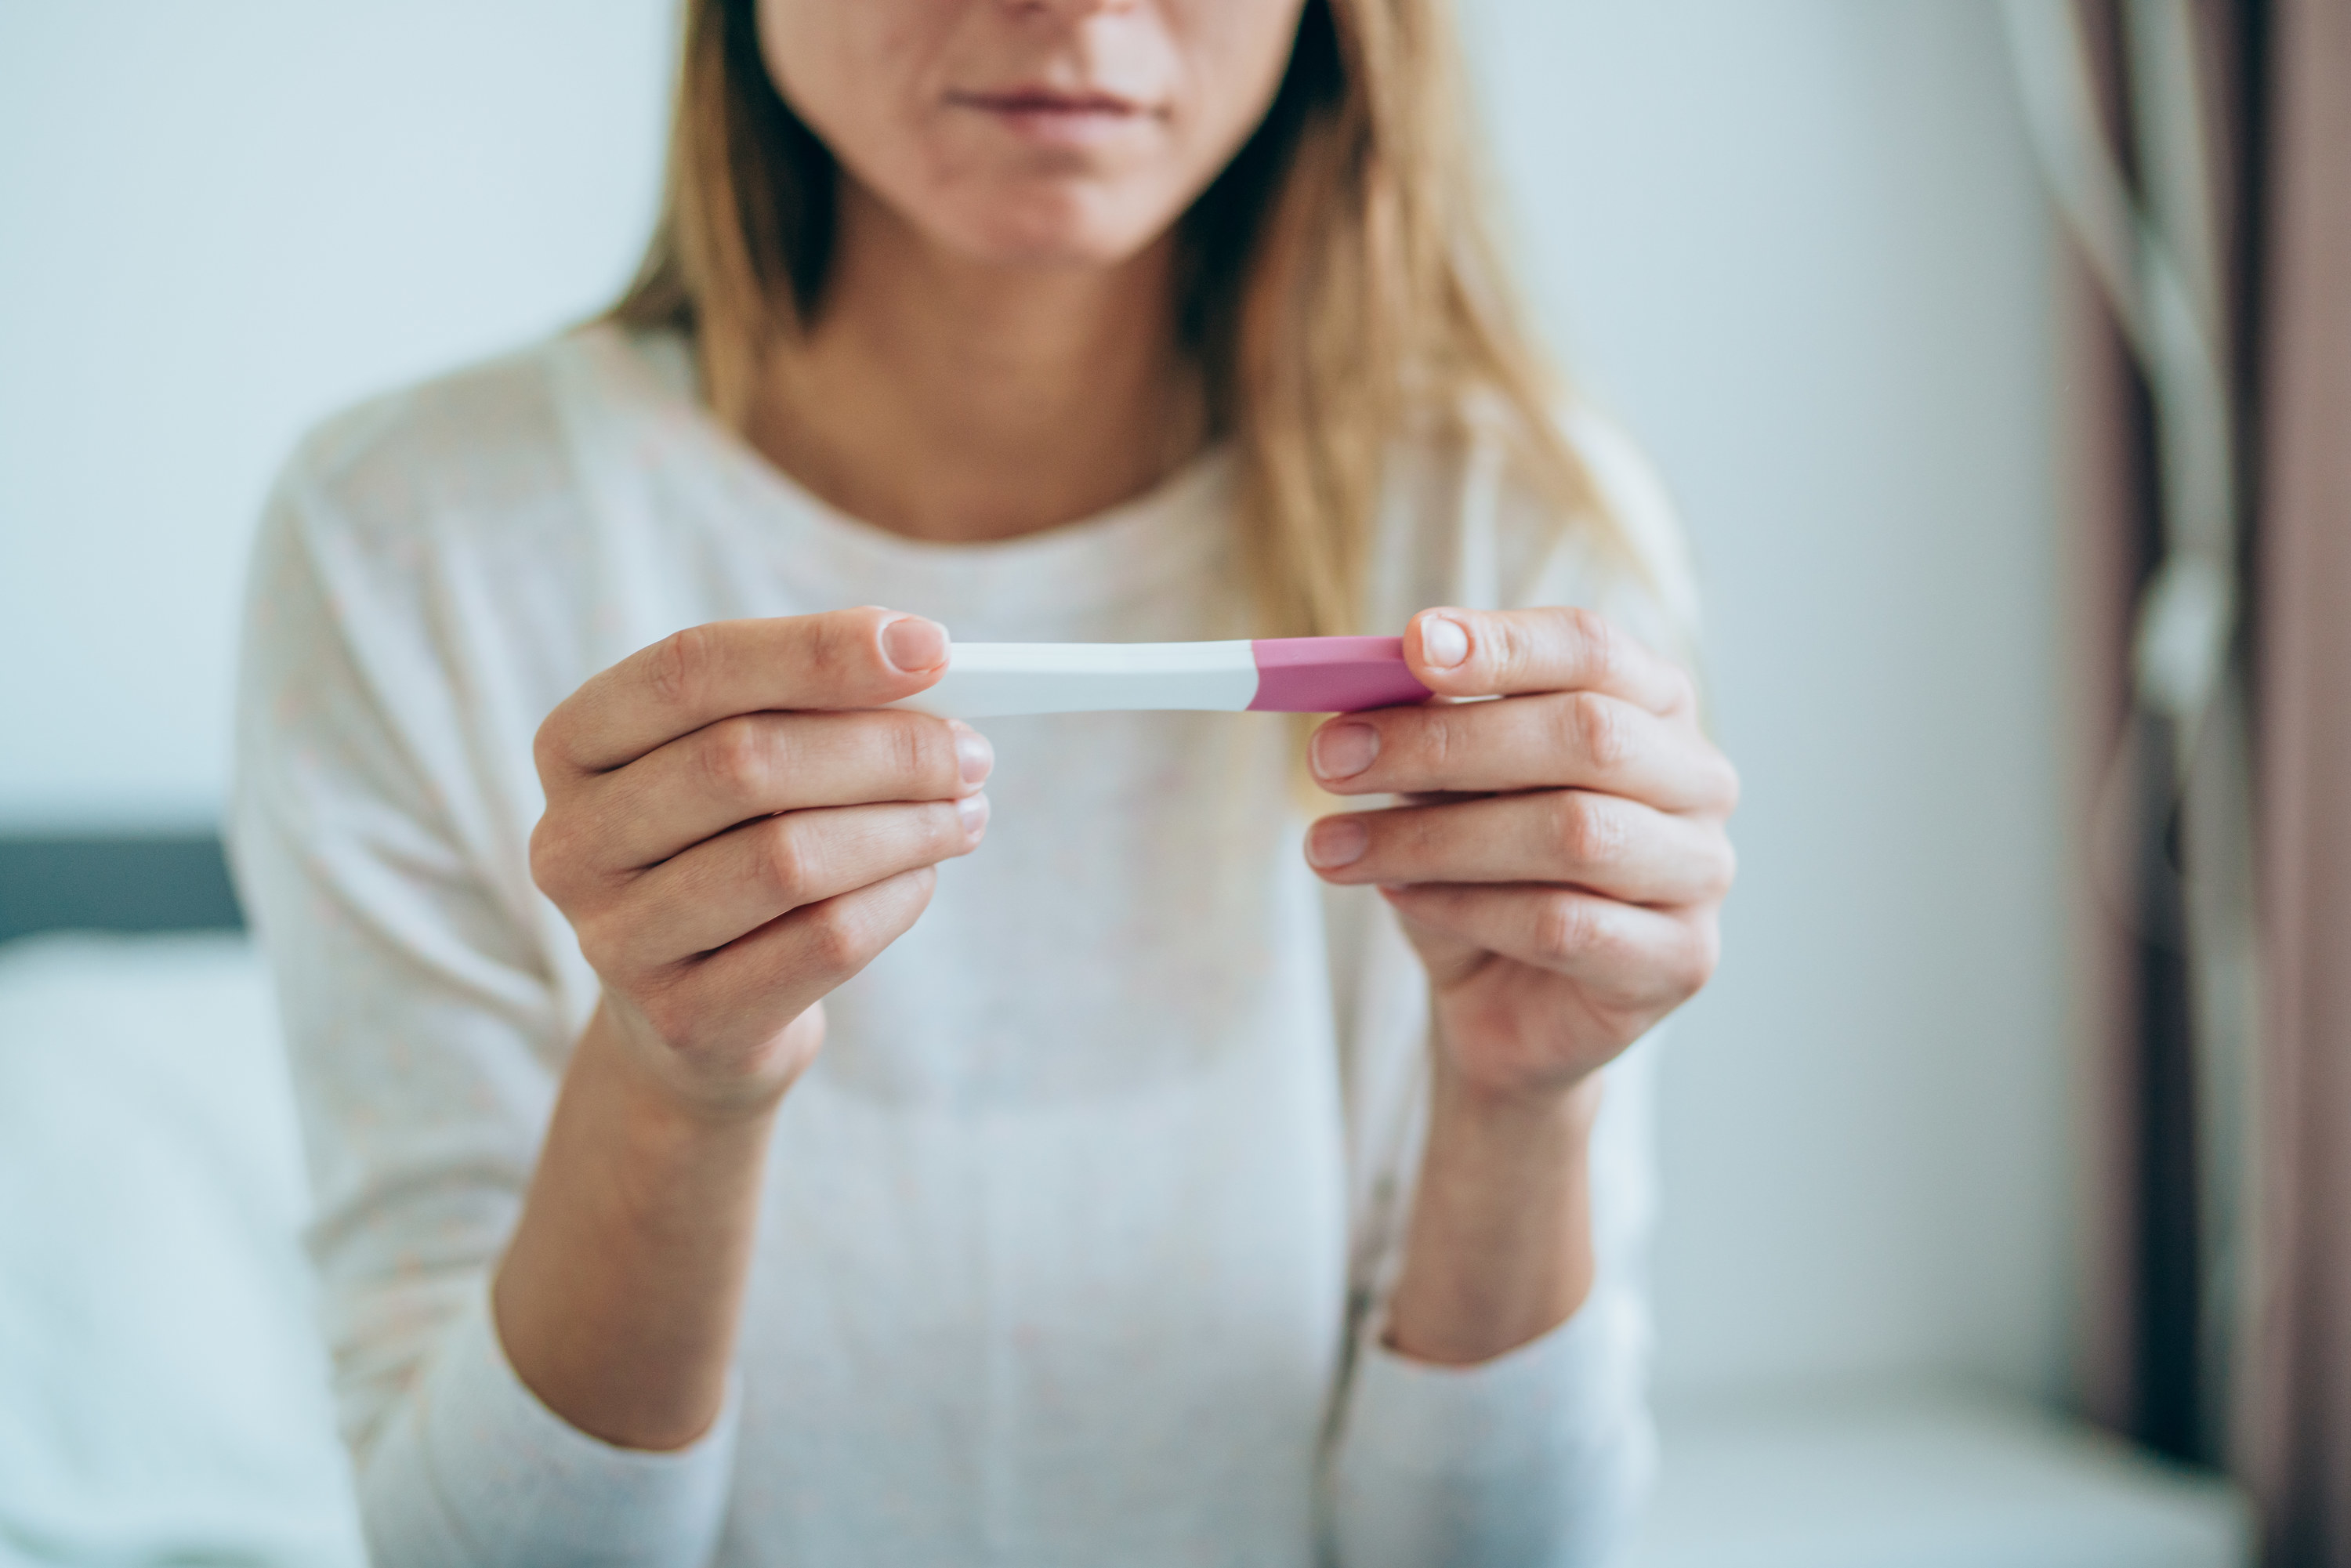 A woman reads the result of a pregnancy test